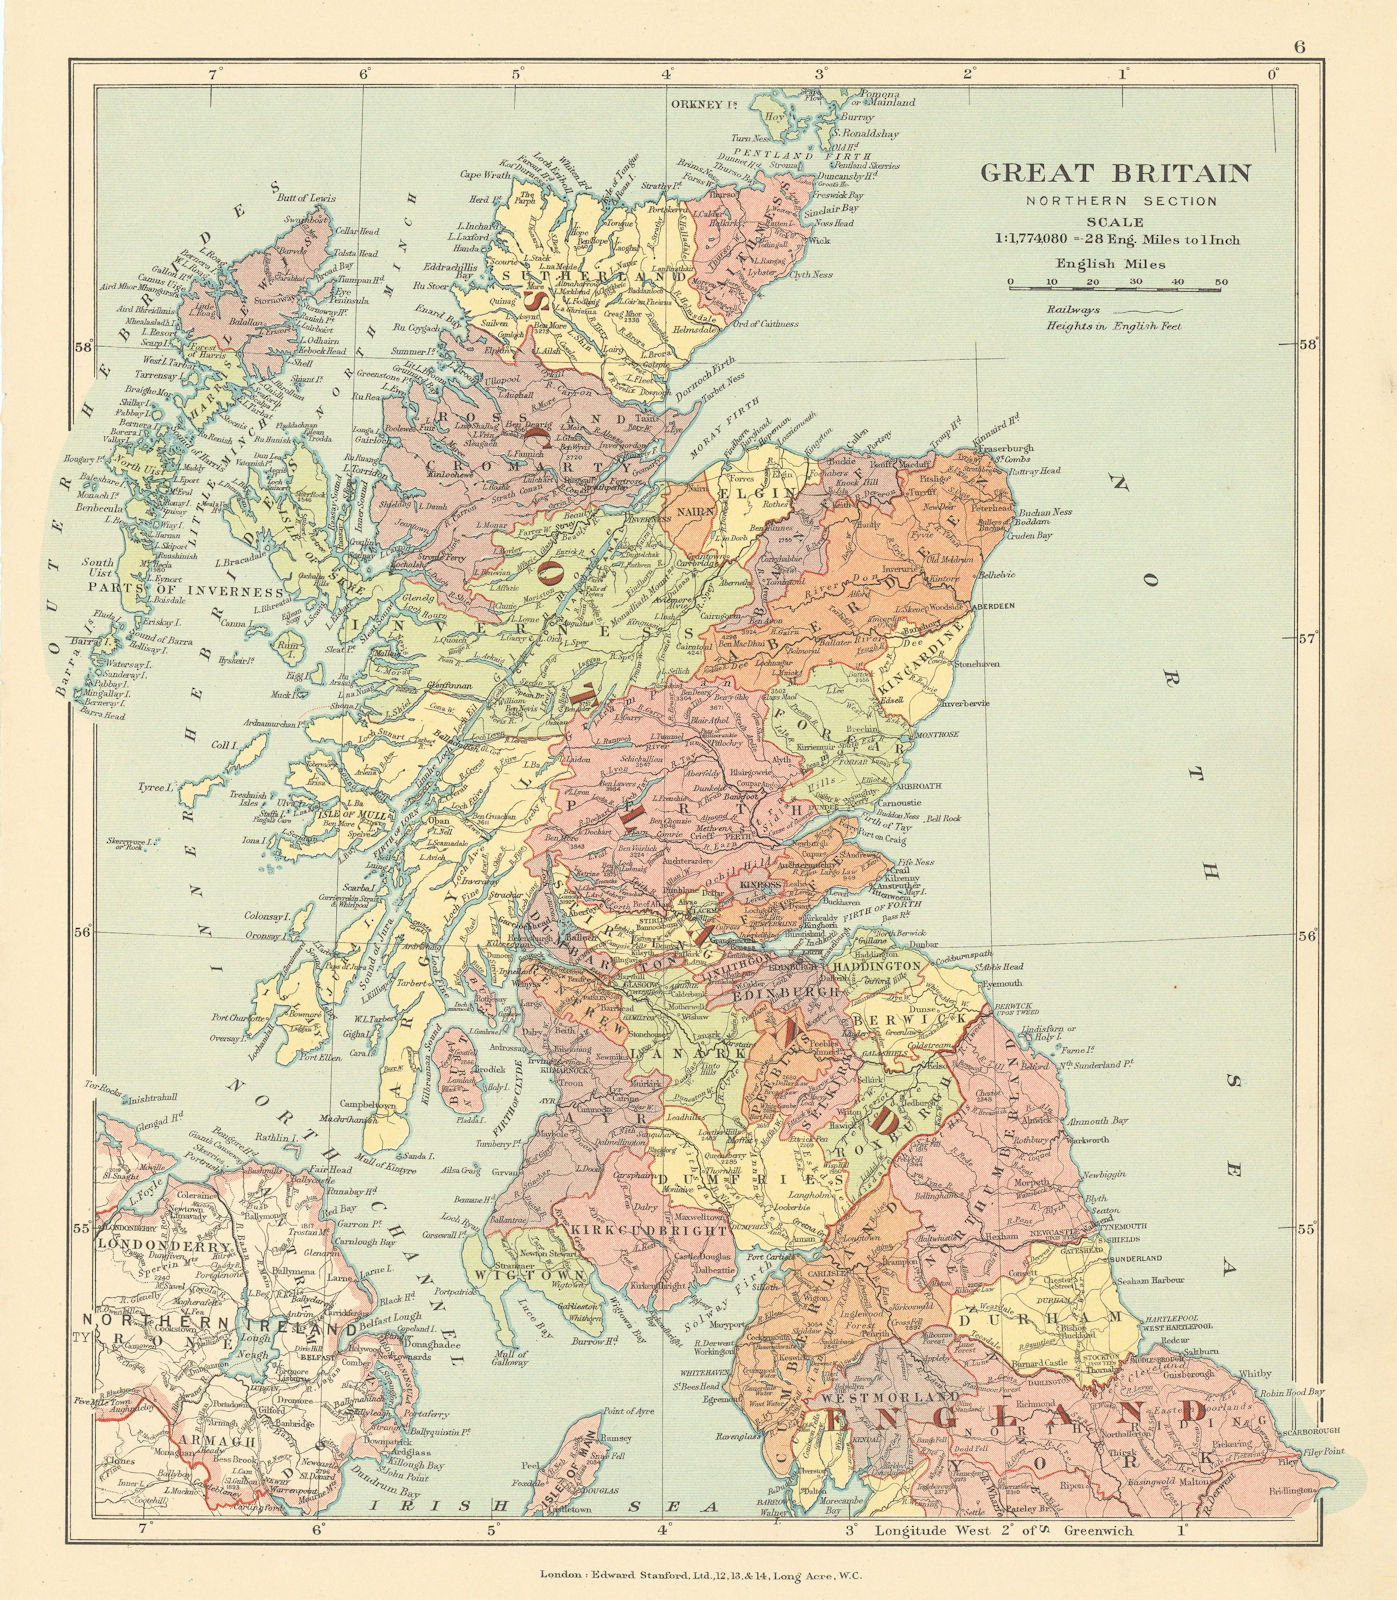 Associate Product Great Britain, Northern Section. Scotland in counties. STANFORD c1925 old map